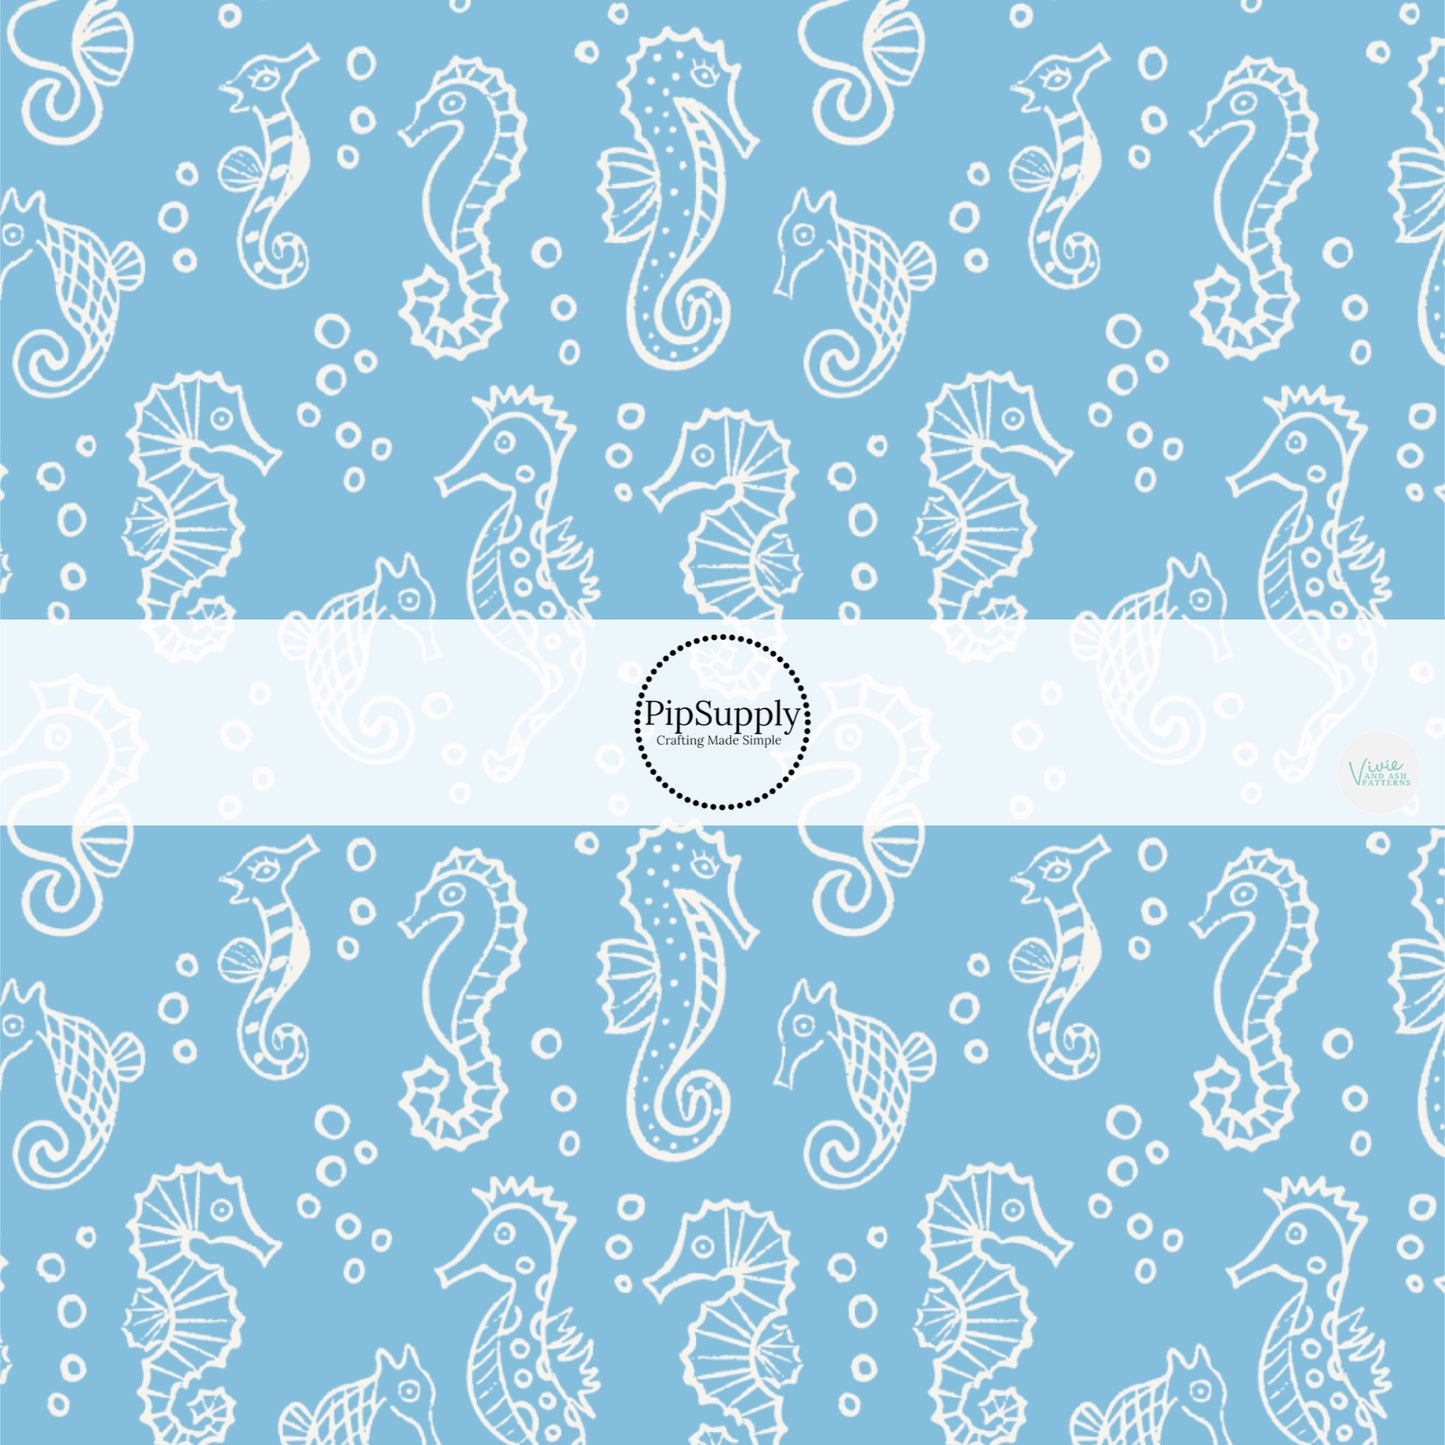 This ocean fabric by the yard features white seahorses on blue. This fun themed fabric can be used for all your sewing and crafting needs!